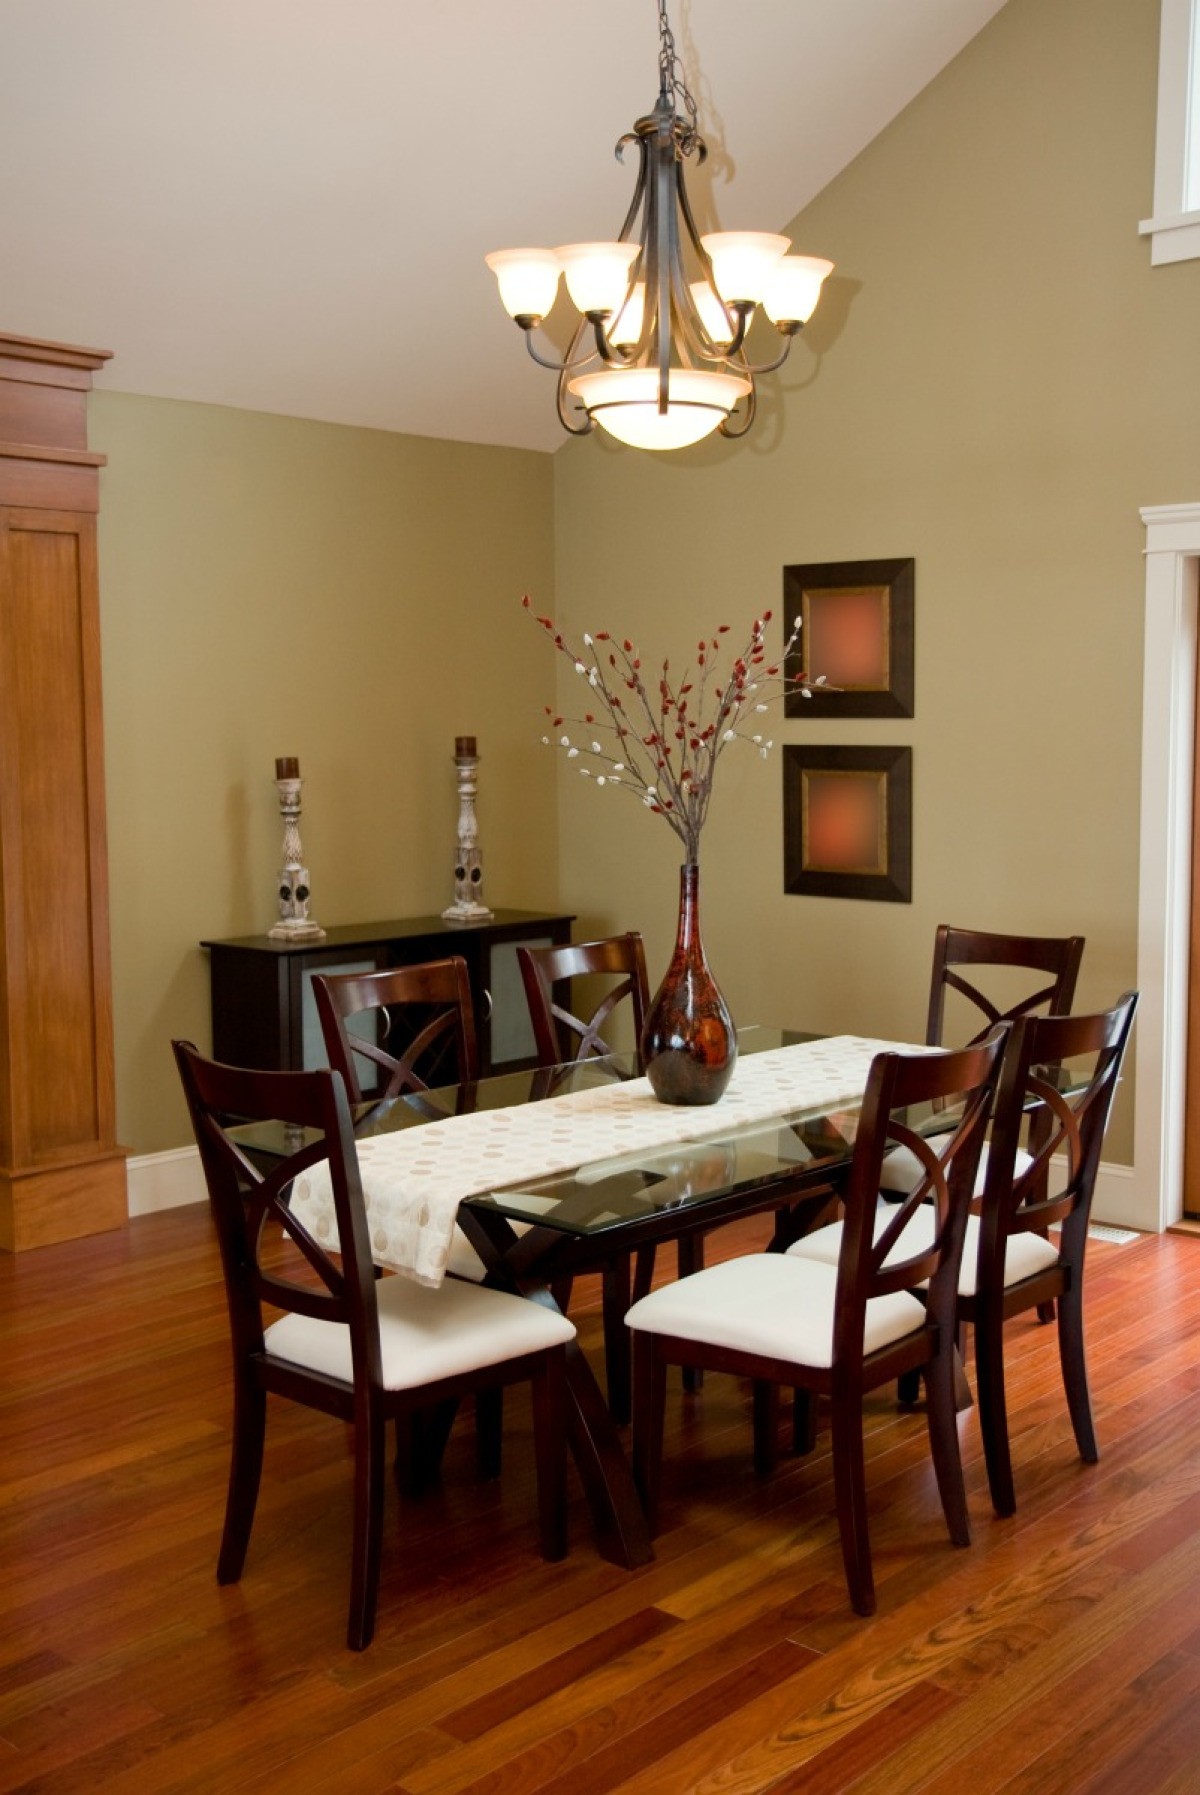 Best Paint For Dining Room Furniture - Paint Ideas